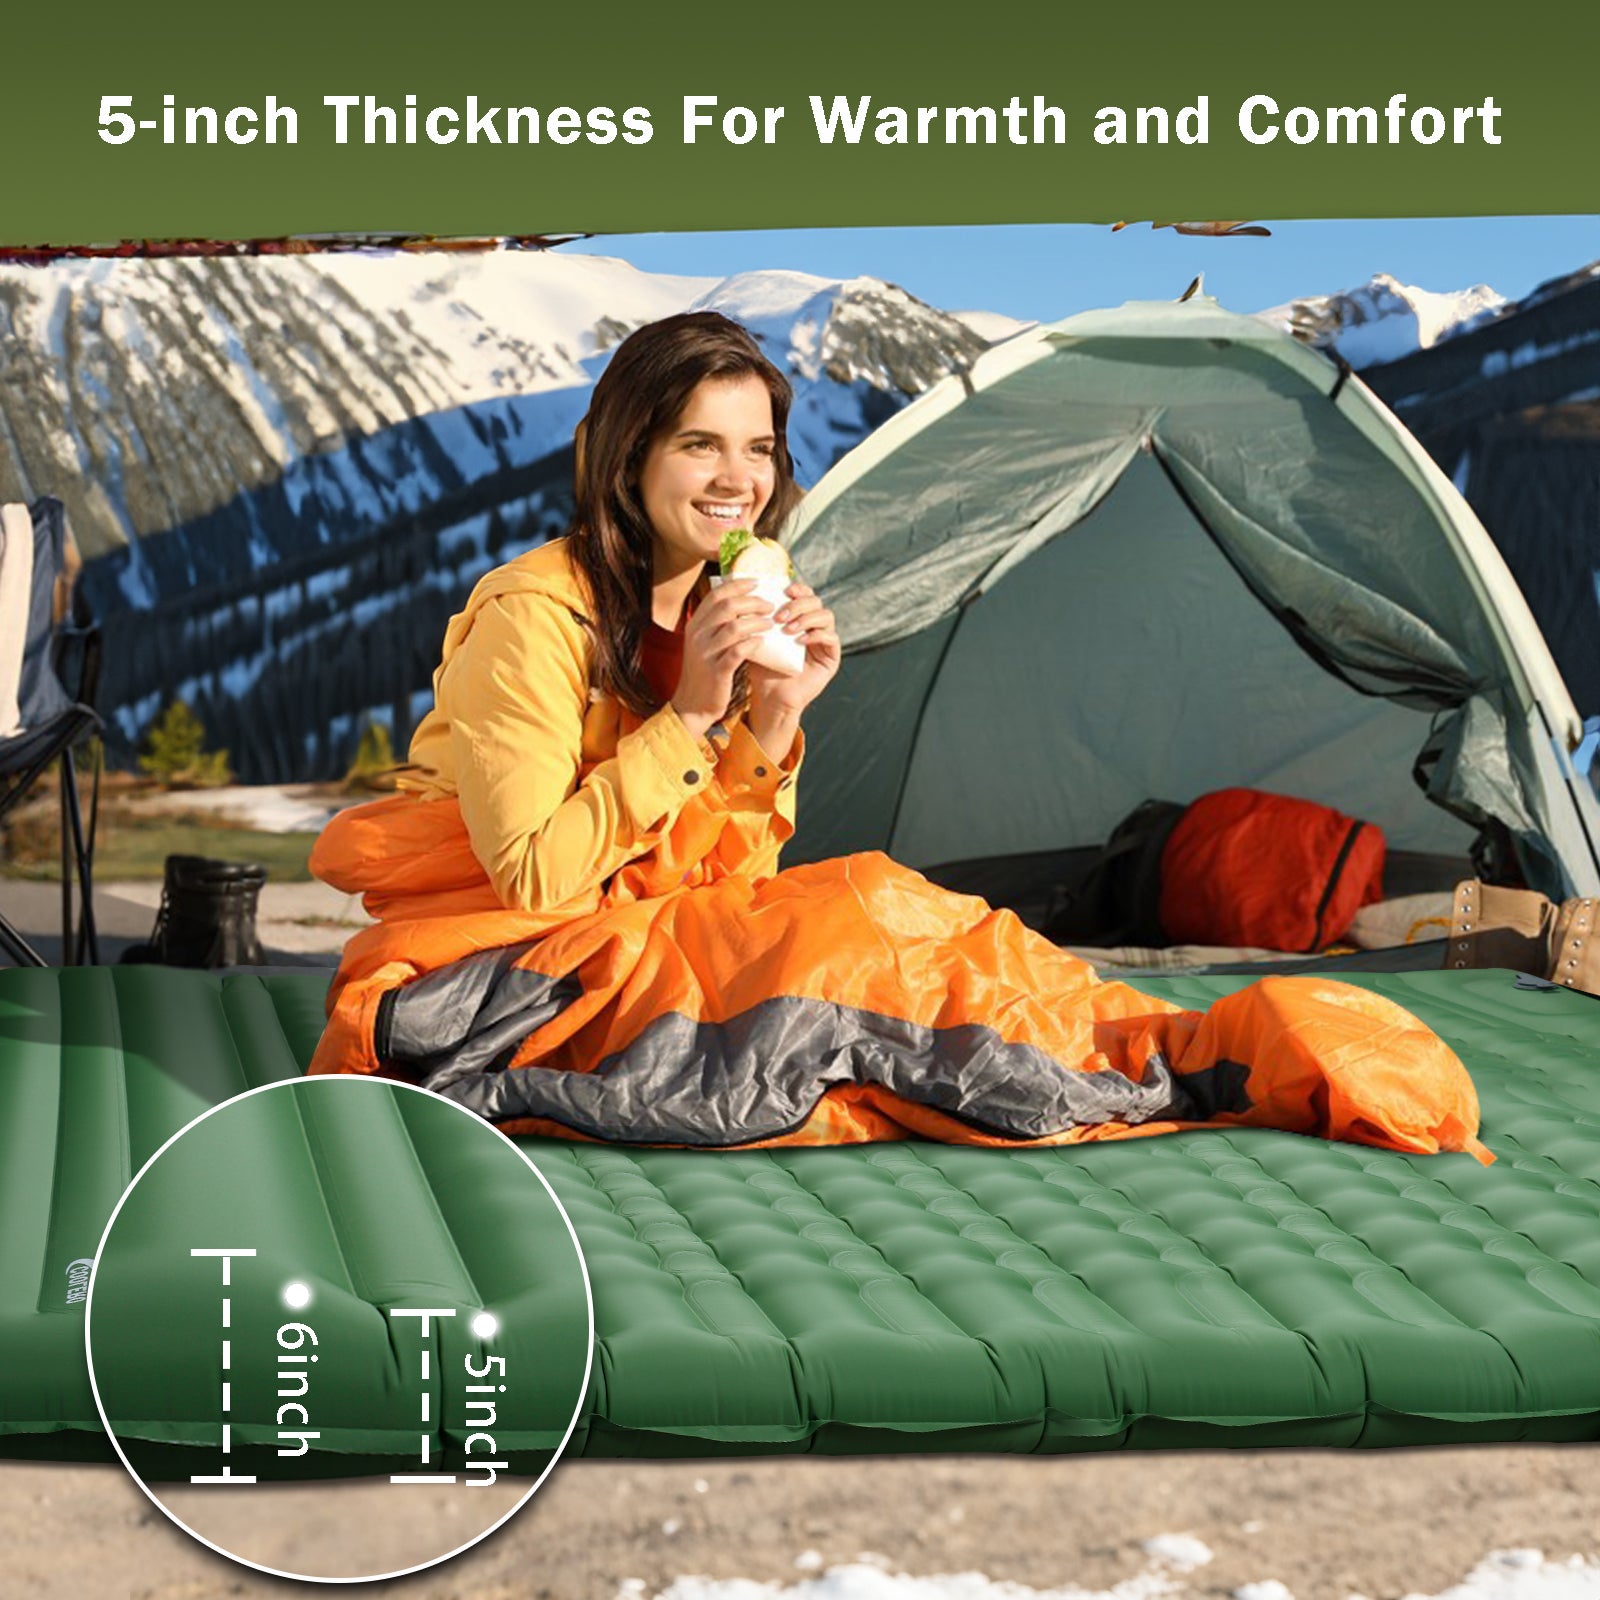  Windrest Double Inflatable Sleeping Pad, thickness, 5-inch, woman camping 